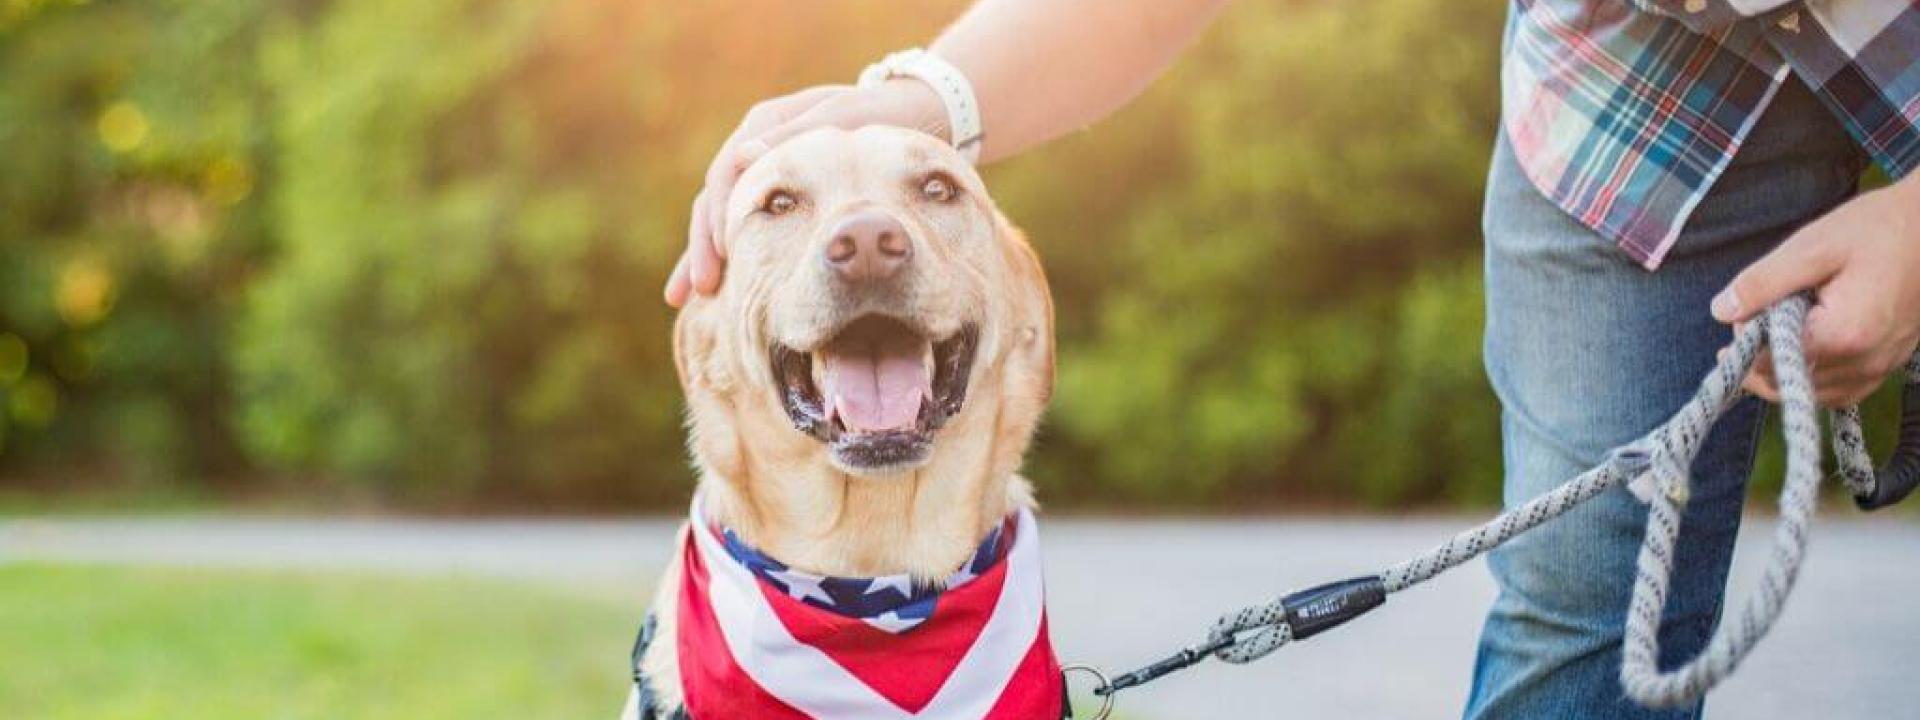 keep your pets safe on 4th of July with microchipping